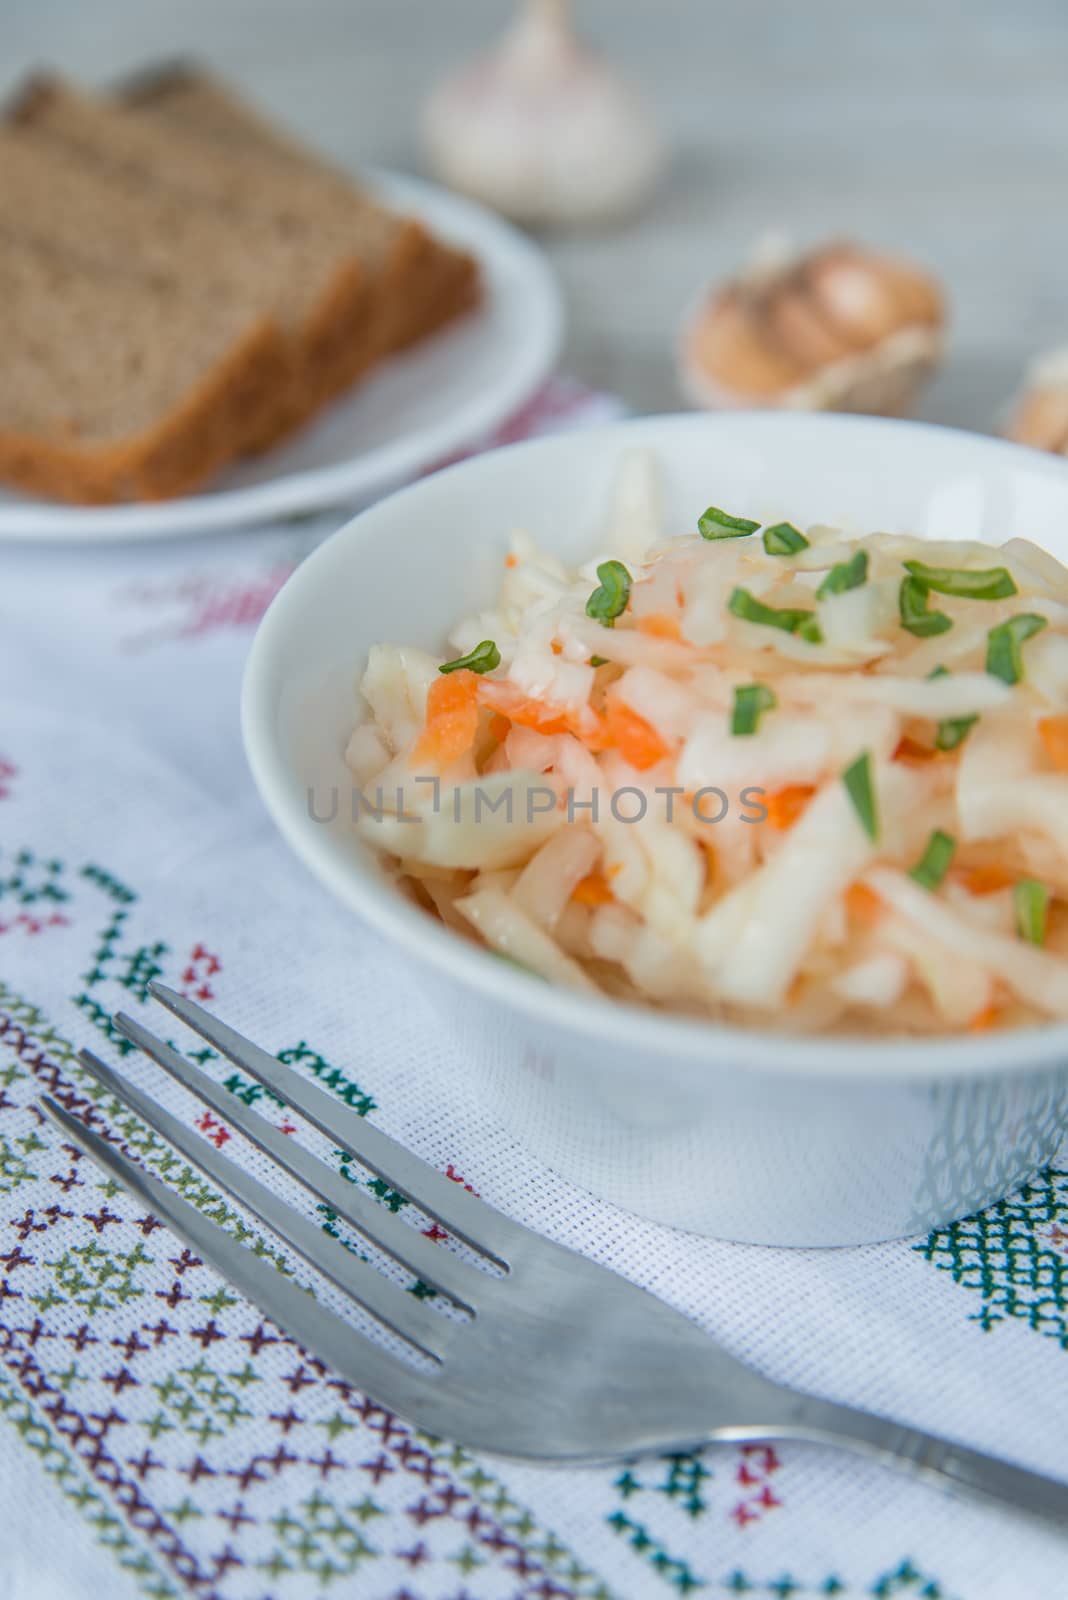 Plate of the sauerkraut with green onion